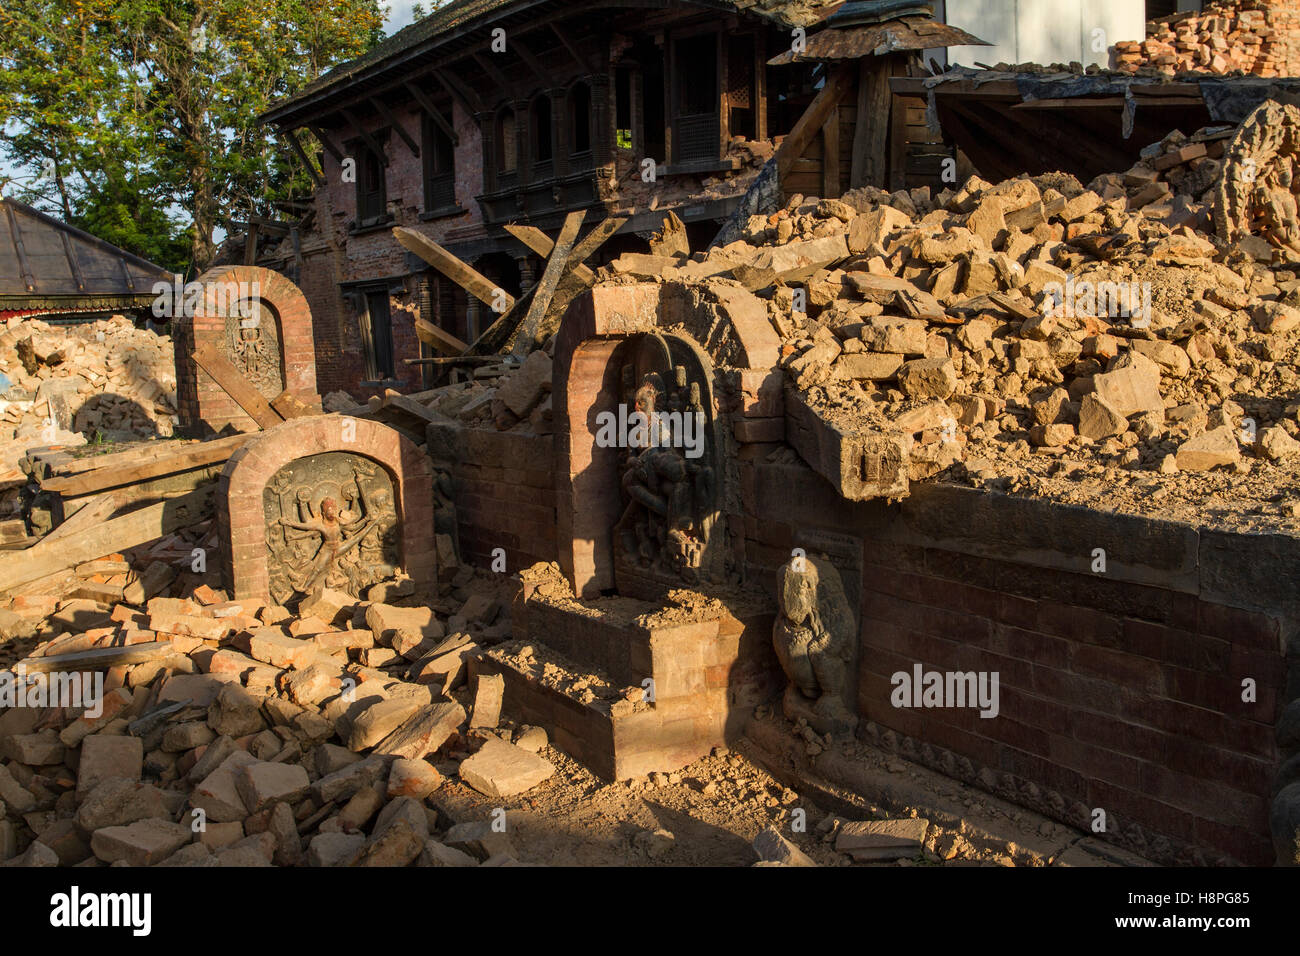 Damaged artefact's at the ancient Changu Narayan in the Kathmandu valley, after 7.8M earthquake struck on 25th April 2015. Stock Photo